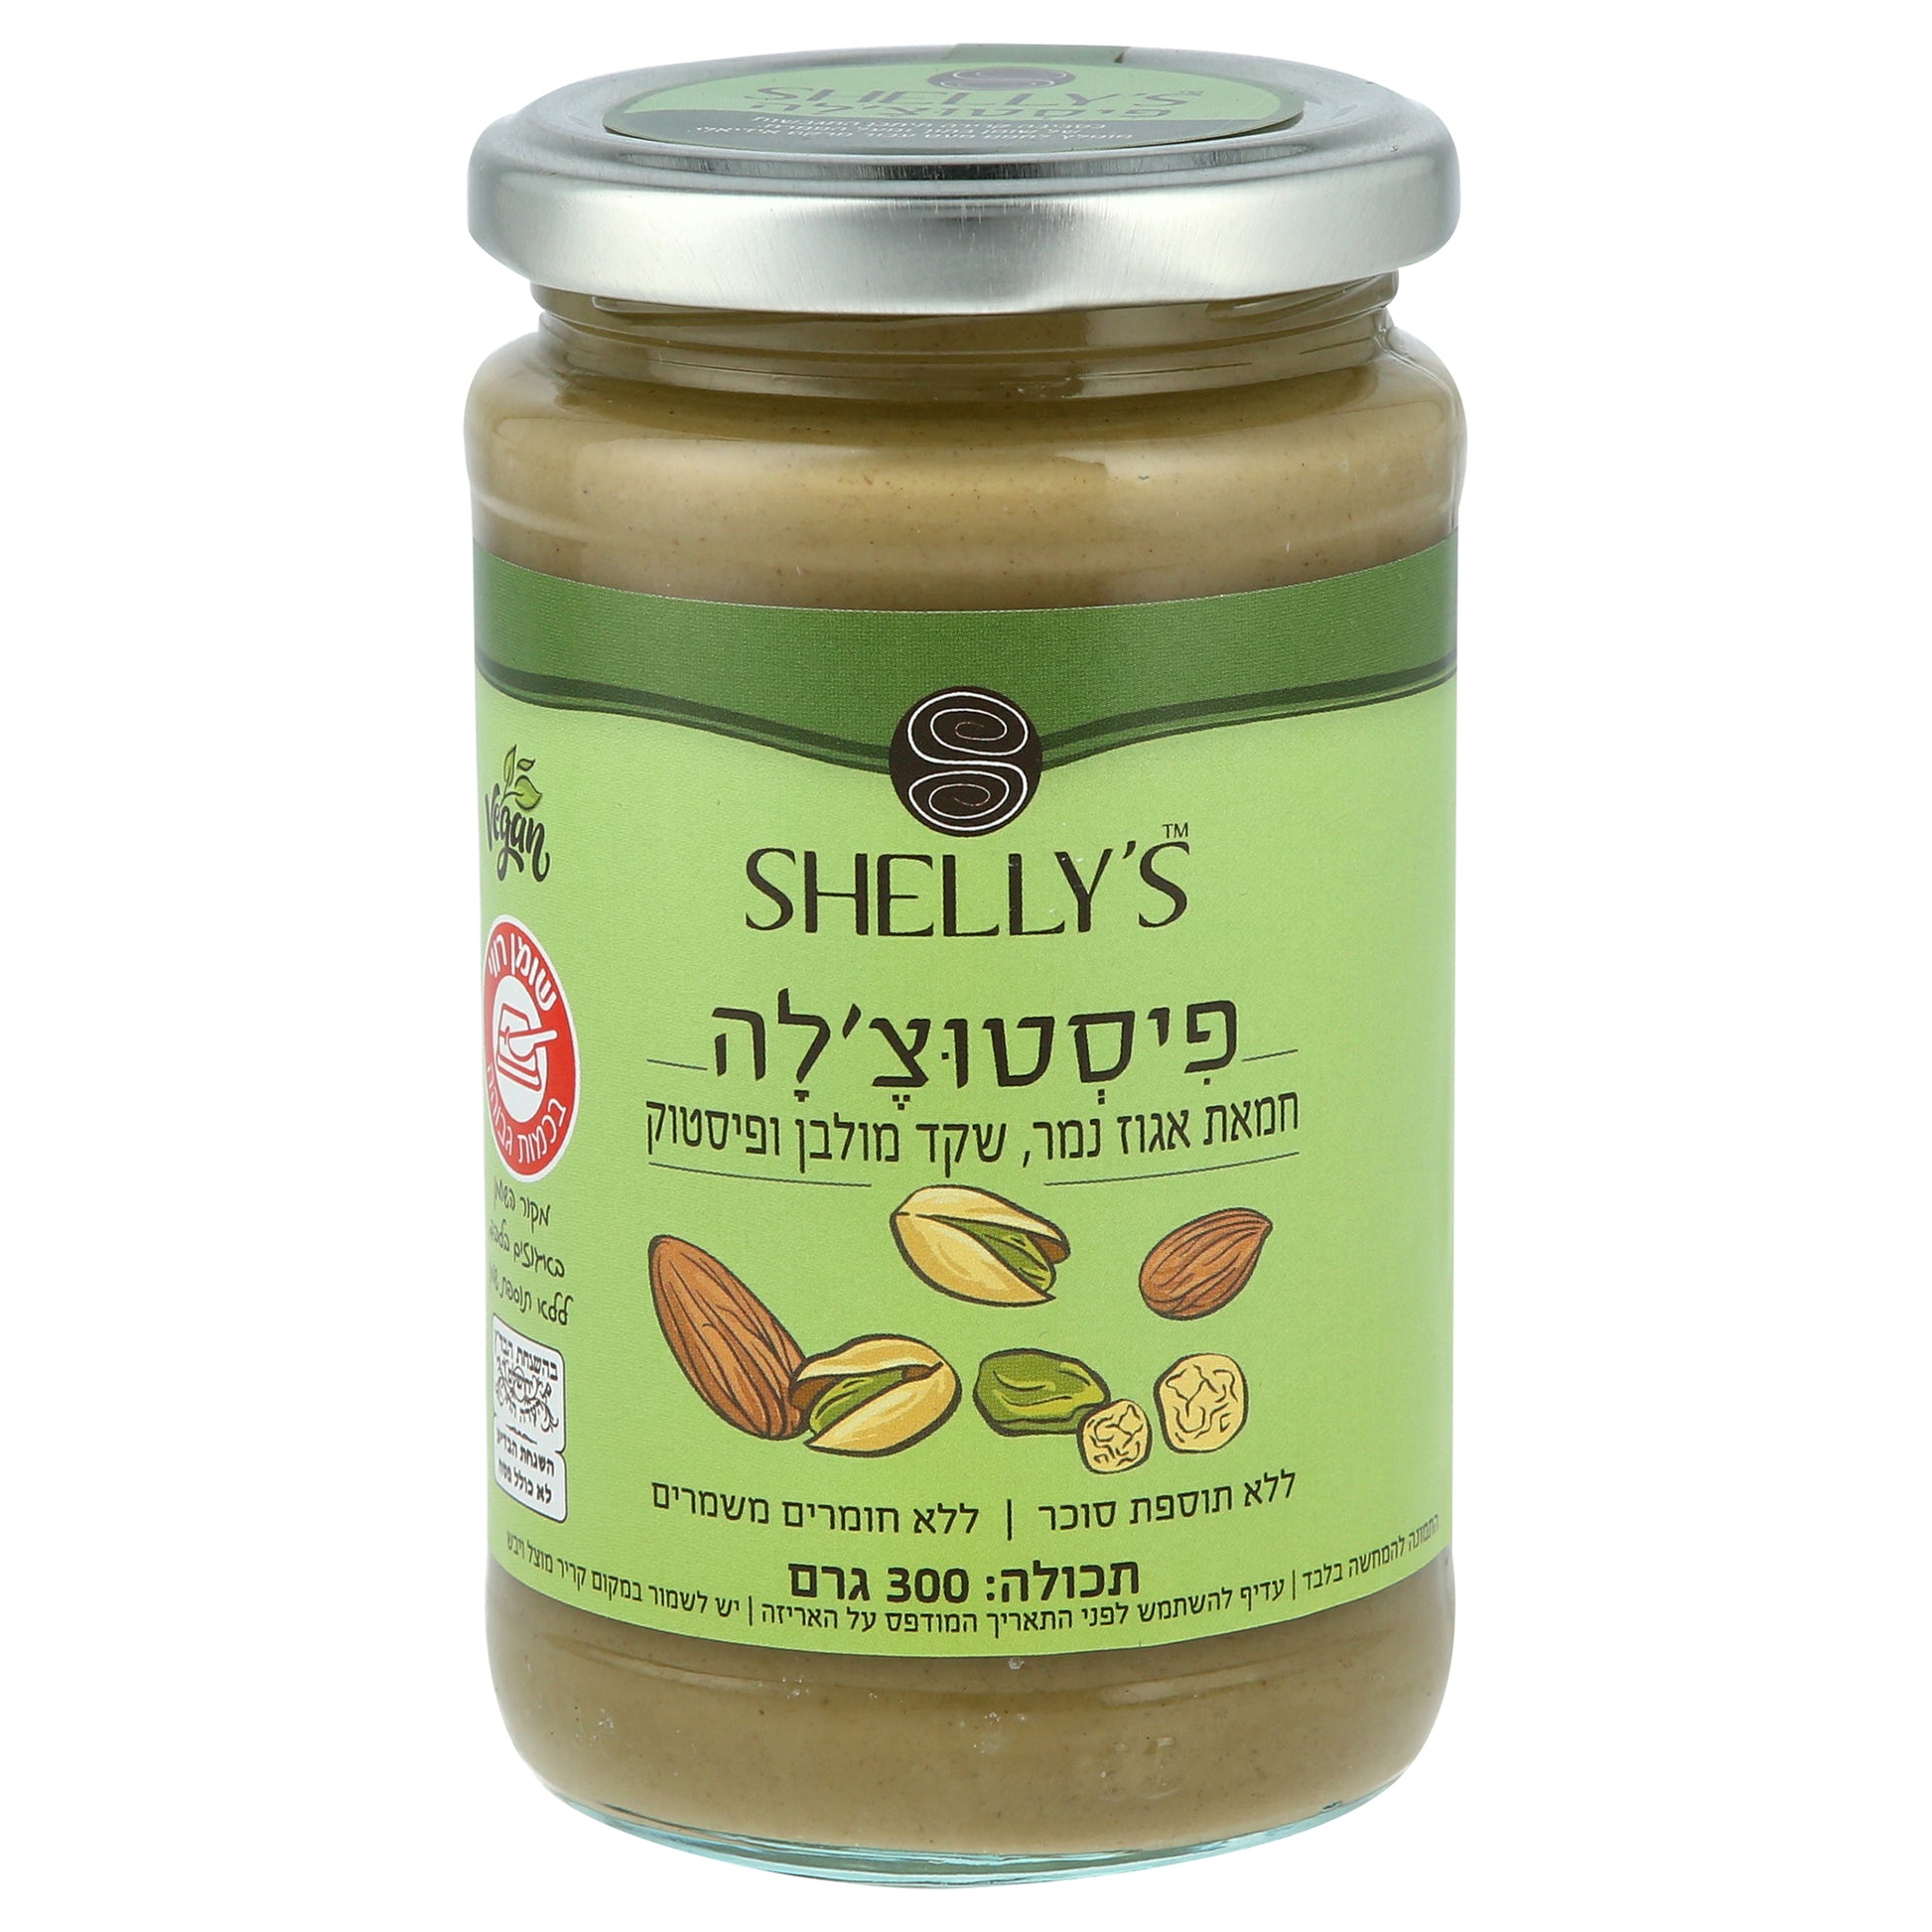 Pistochella - tiger nut butter, blanched almond and pistachio - Shelly's - Israel Menu